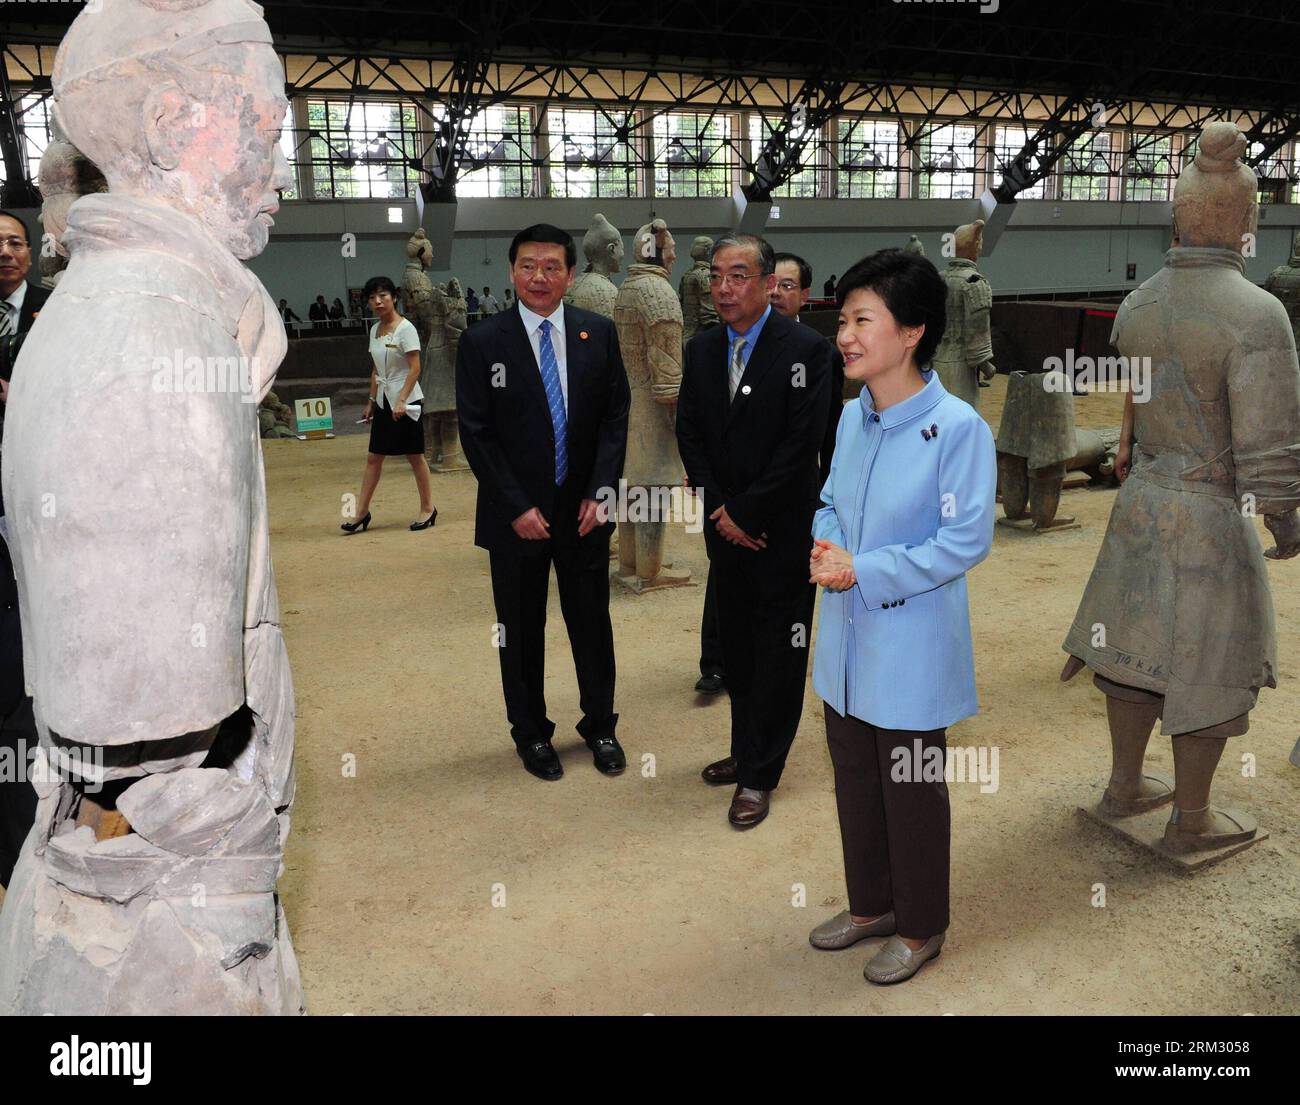 Bildnummer: 59920643  Datum: 30.06.2013  Copyright: imago/Xinhua (130630) -- XI AN, June 30, 2013 (Xinhua) -- Republic of Korea (ROK) President Park Geun-hye visits the ancient terracotta army, buried for centuries to guard the tomb of China s first emperor Qinshihuang of the Qin Dynasty (221 BC-207 BC), in Xi an, capital city of northwest China s Shaanxi Province, on June 30, 2013. (Xinhua/Ding Haitao) (ry) CHINA-XI AN-ROK PRESIDENT-ARRIVE (CN) PUBLICATIONxNOTxINxCHN Politik people Südkorea Terrakotta Armee Soldat xas x0x 2013 quer premiumd      59920643 Date 30 06 2013 Copyright Imago XINHUA Stock Photo